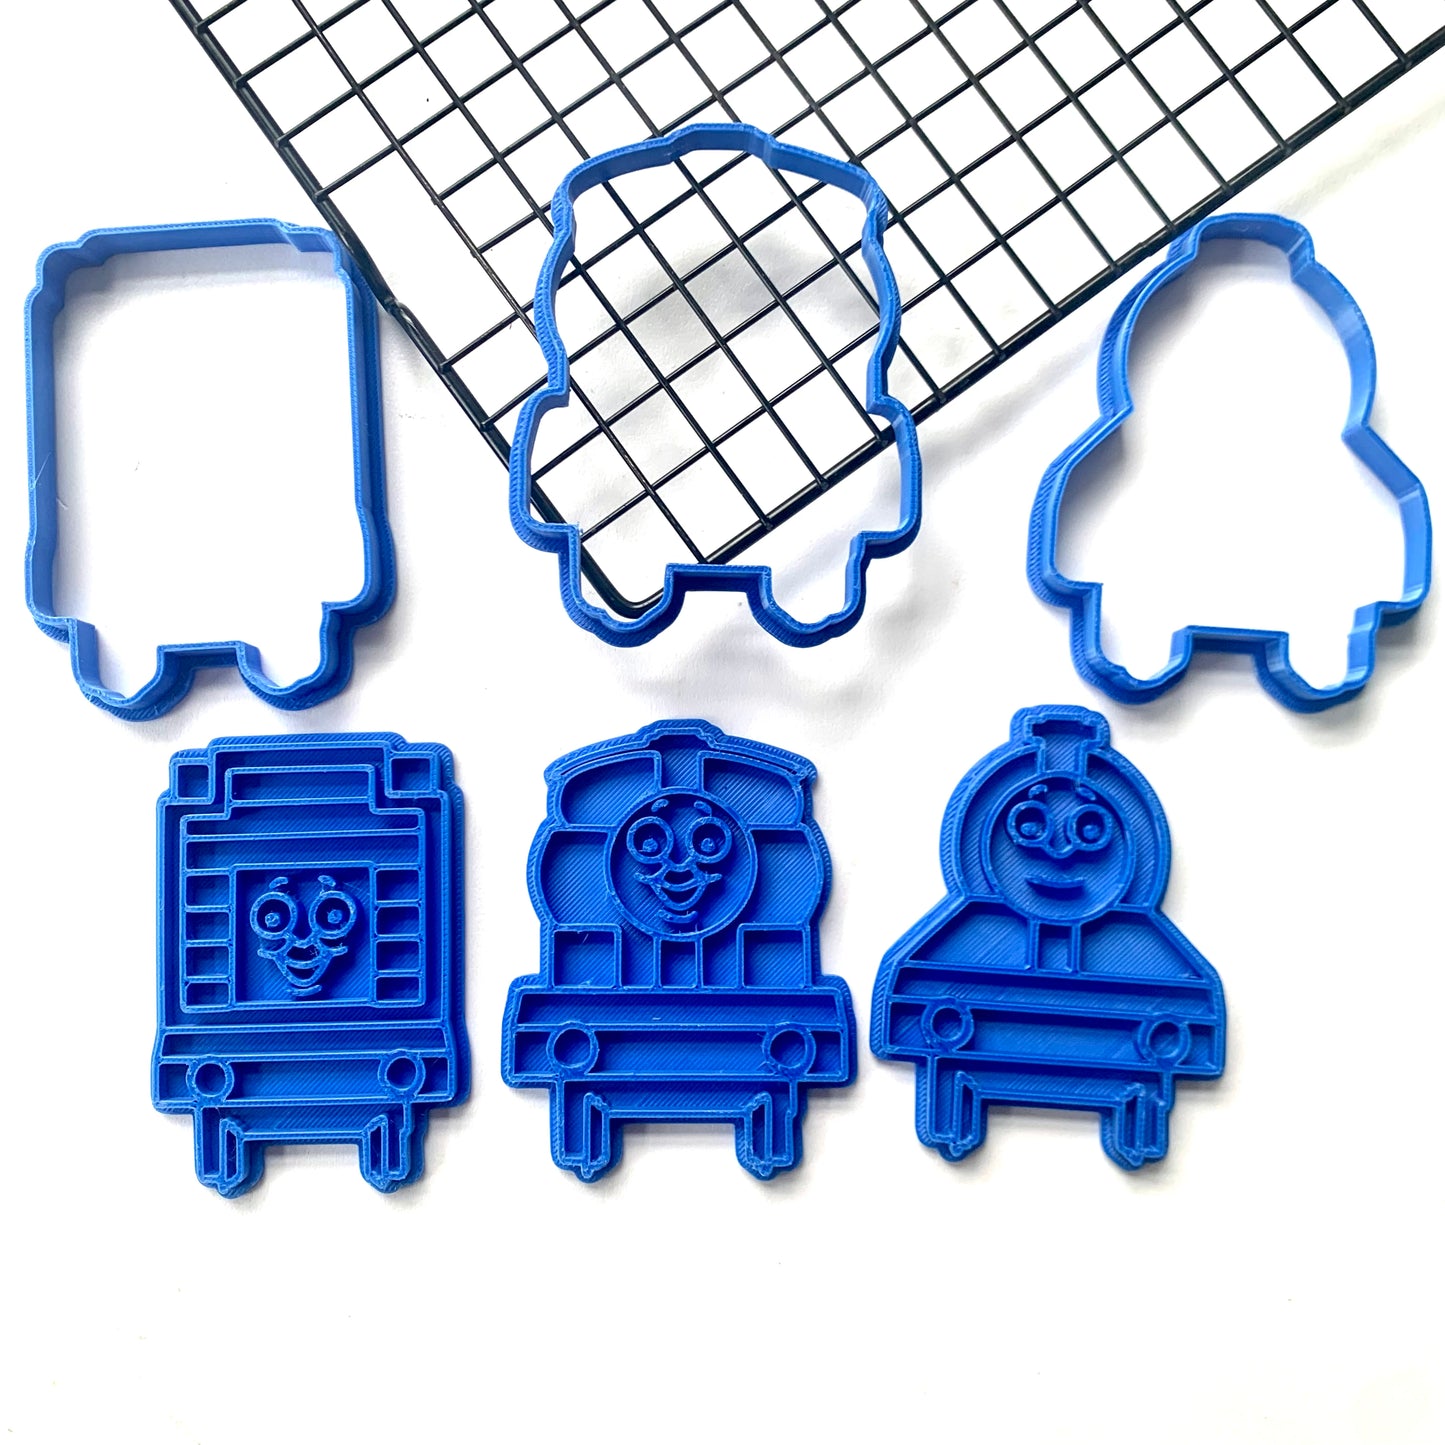 Thomas The thank and friends - Cookie Cutters MEG cookie cutters